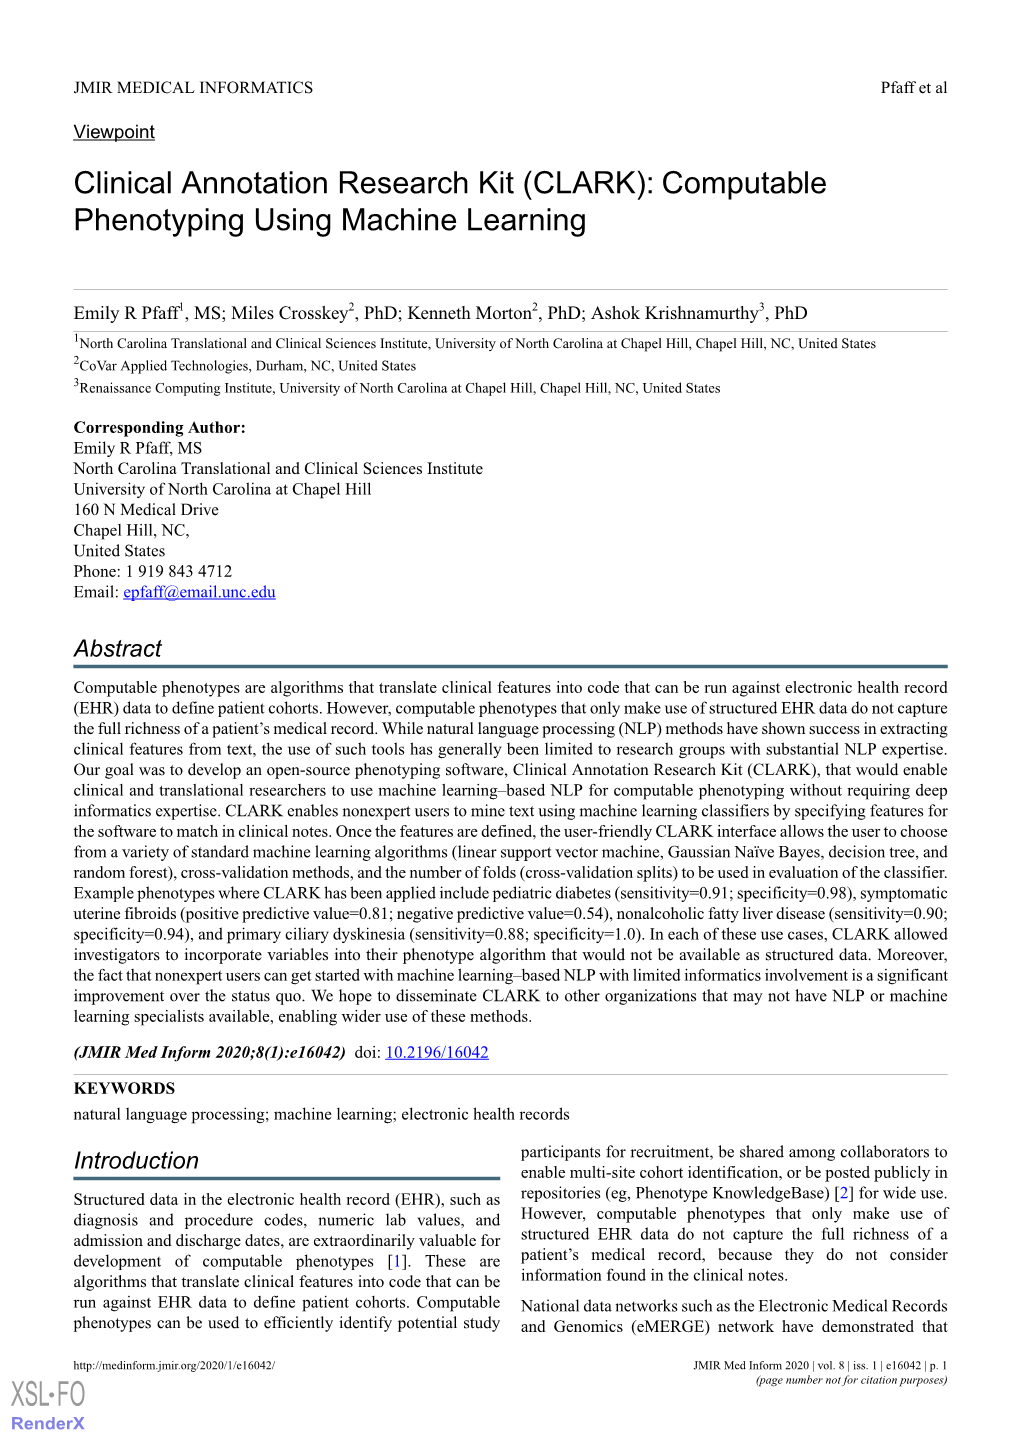 Clinical Annotation Research Kit (CLARK): Computable Phenotyping Using Machine Learning